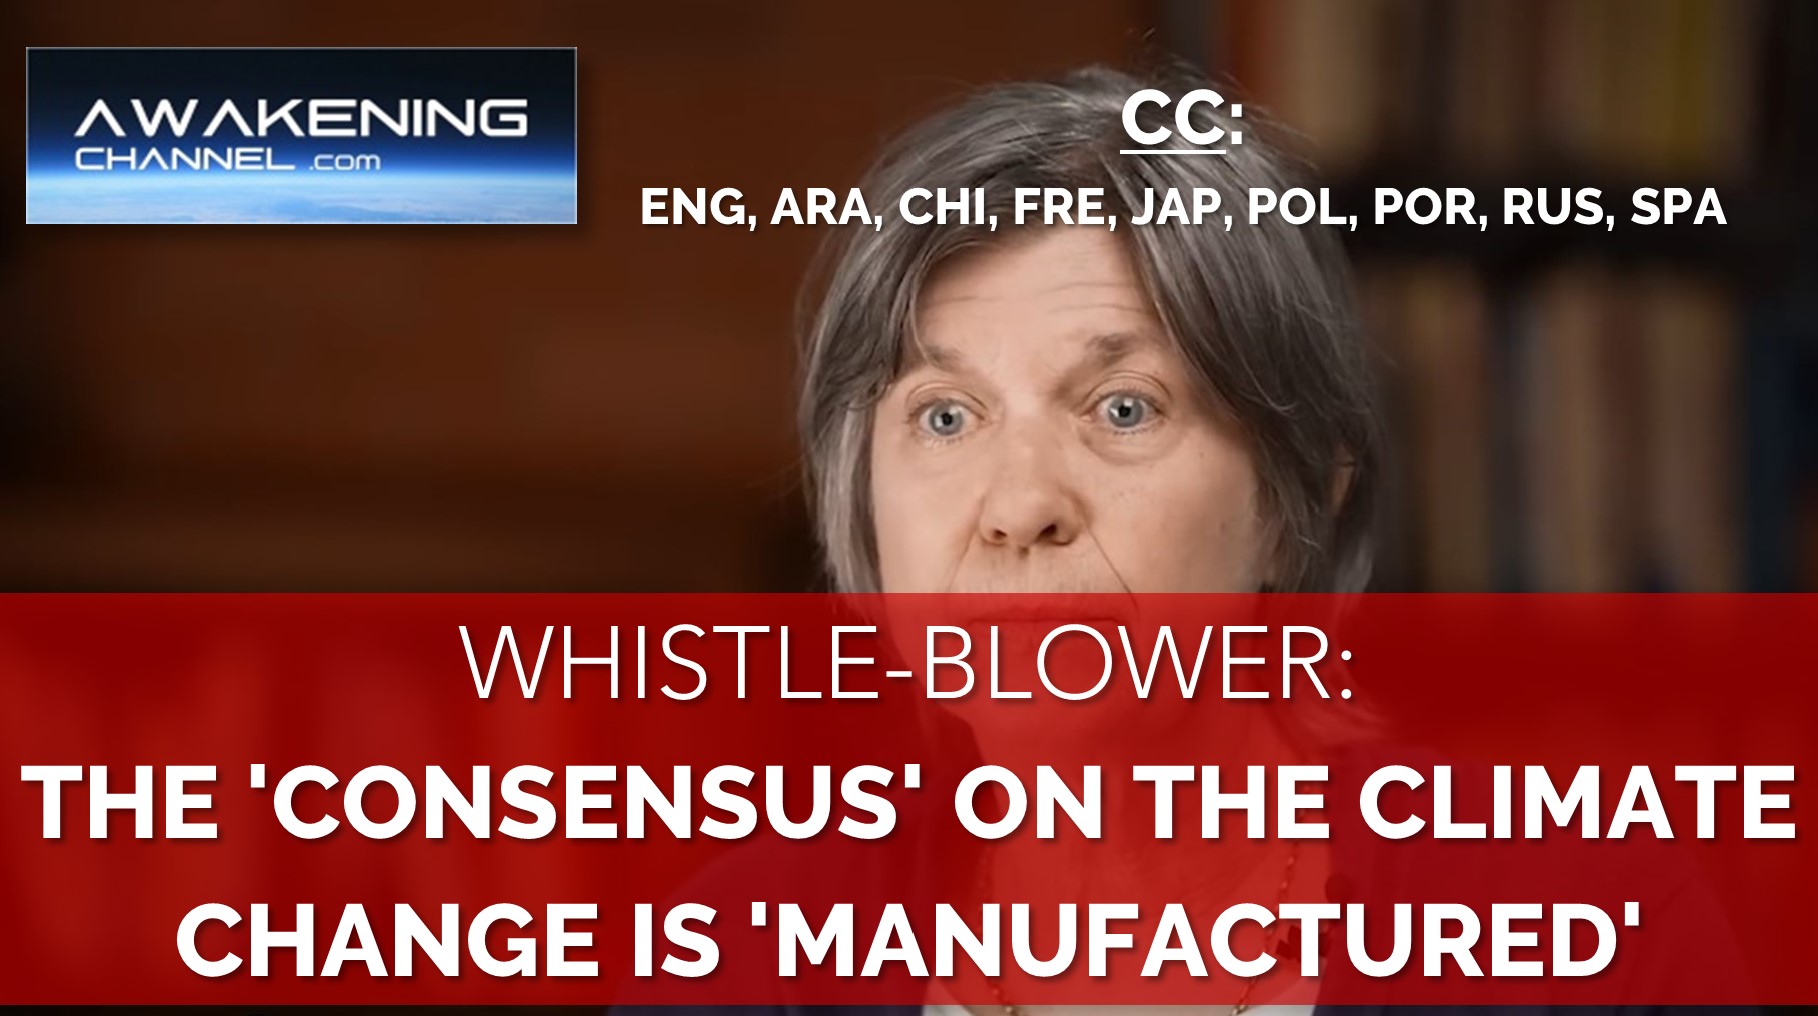 Whistle-blower: The ‘Overwhelming Consensus’ on the Climate Change Crisis is ‘Manufactured’